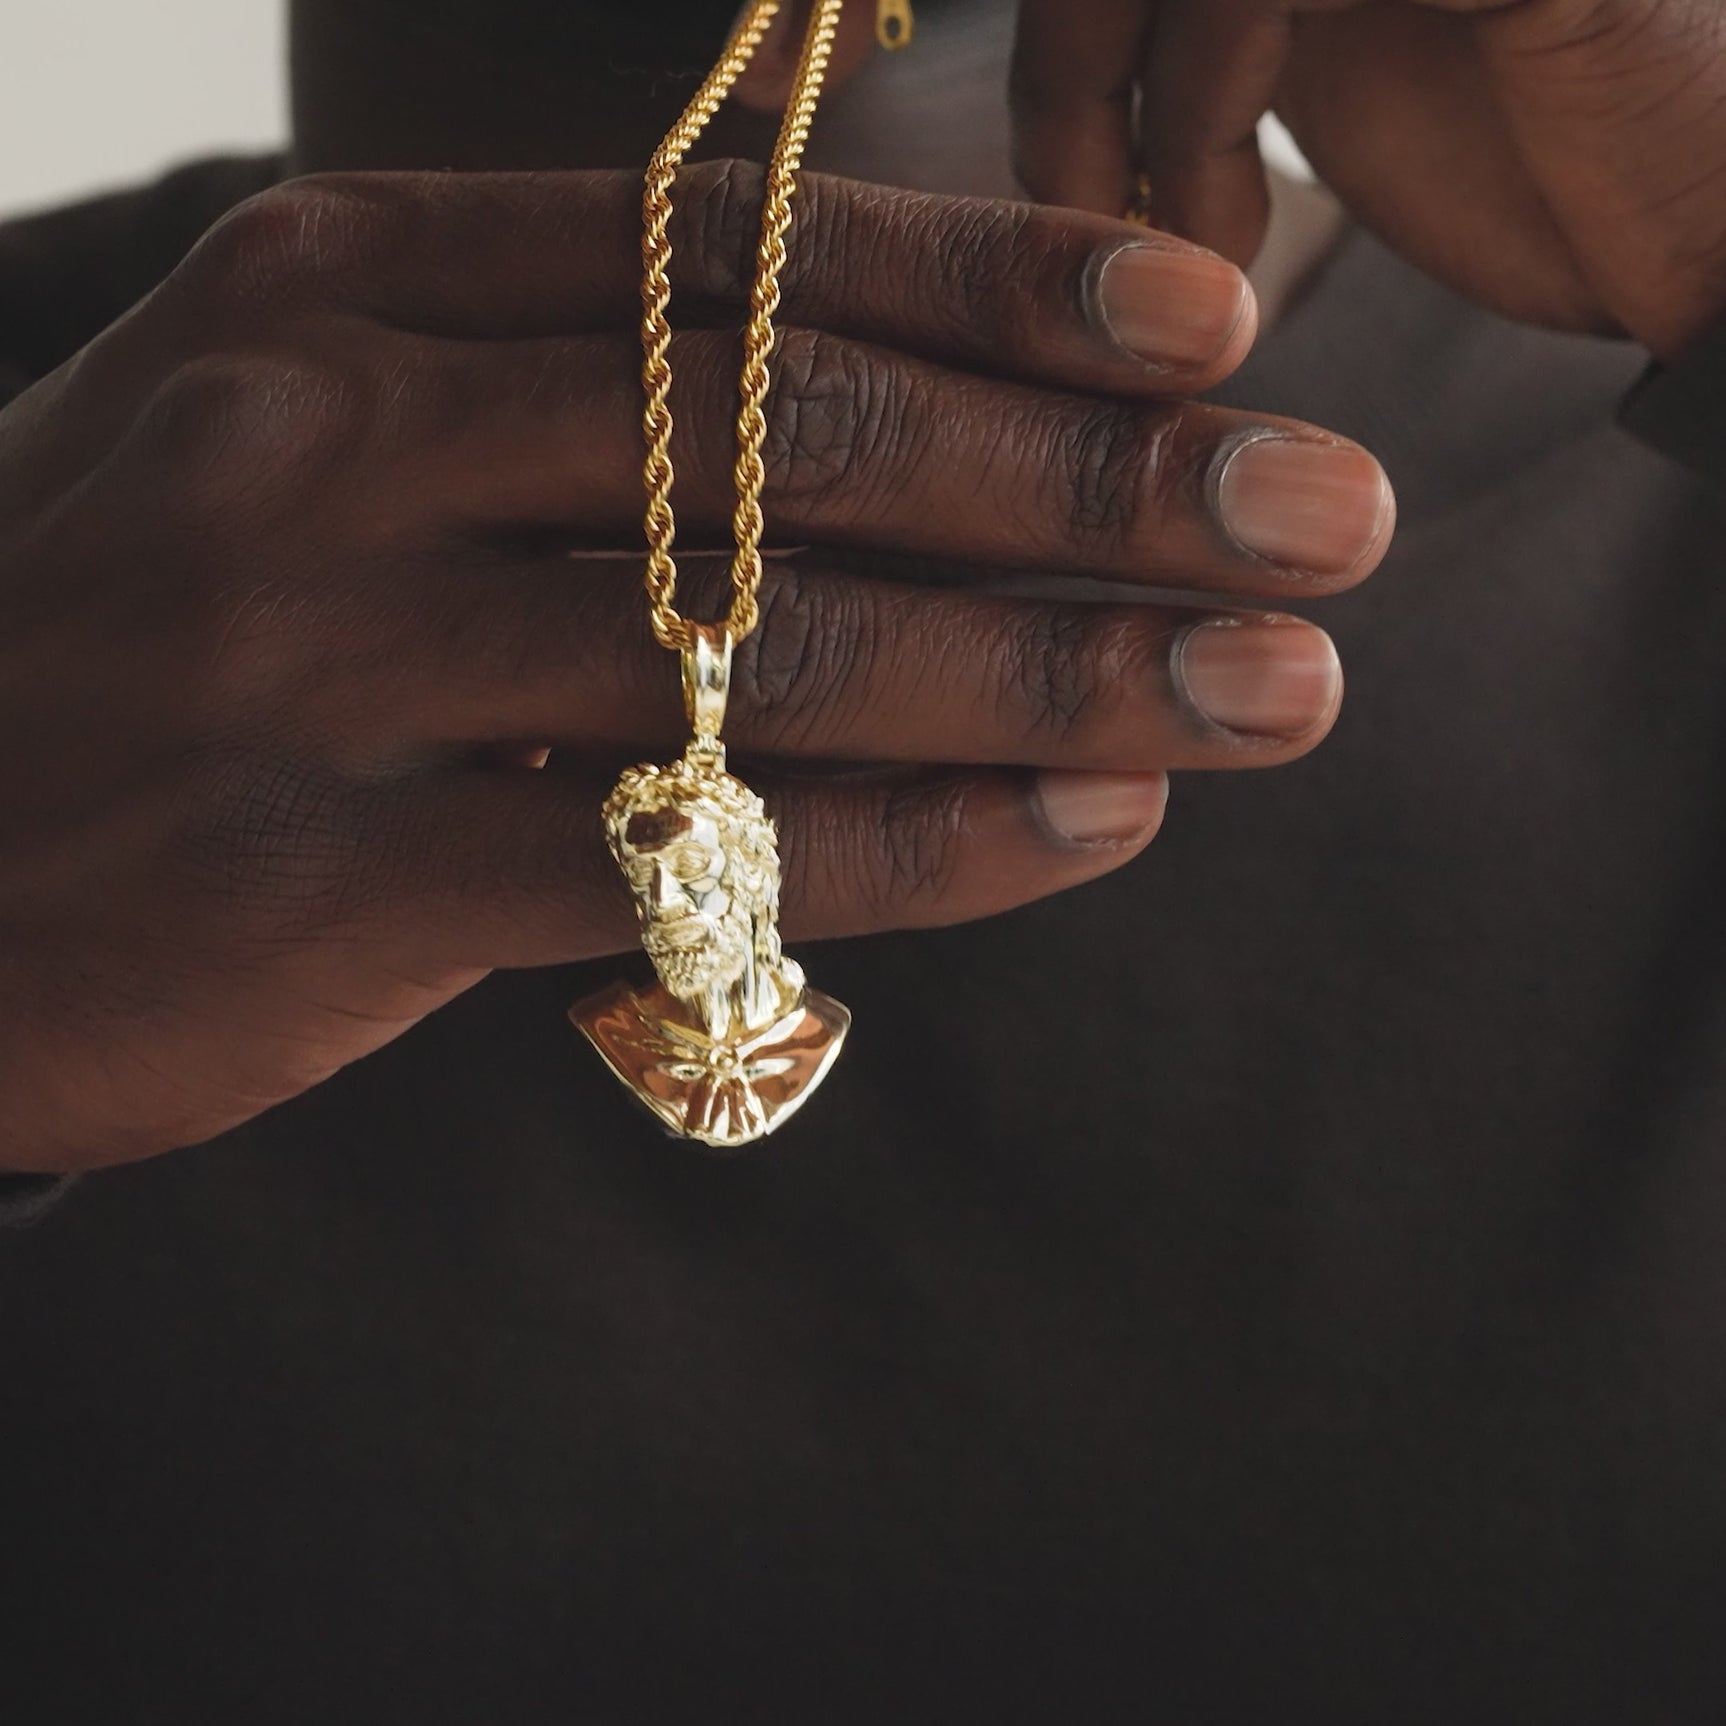 Zeus Necklace Pendant & Rope Chain The Gold Gods Video